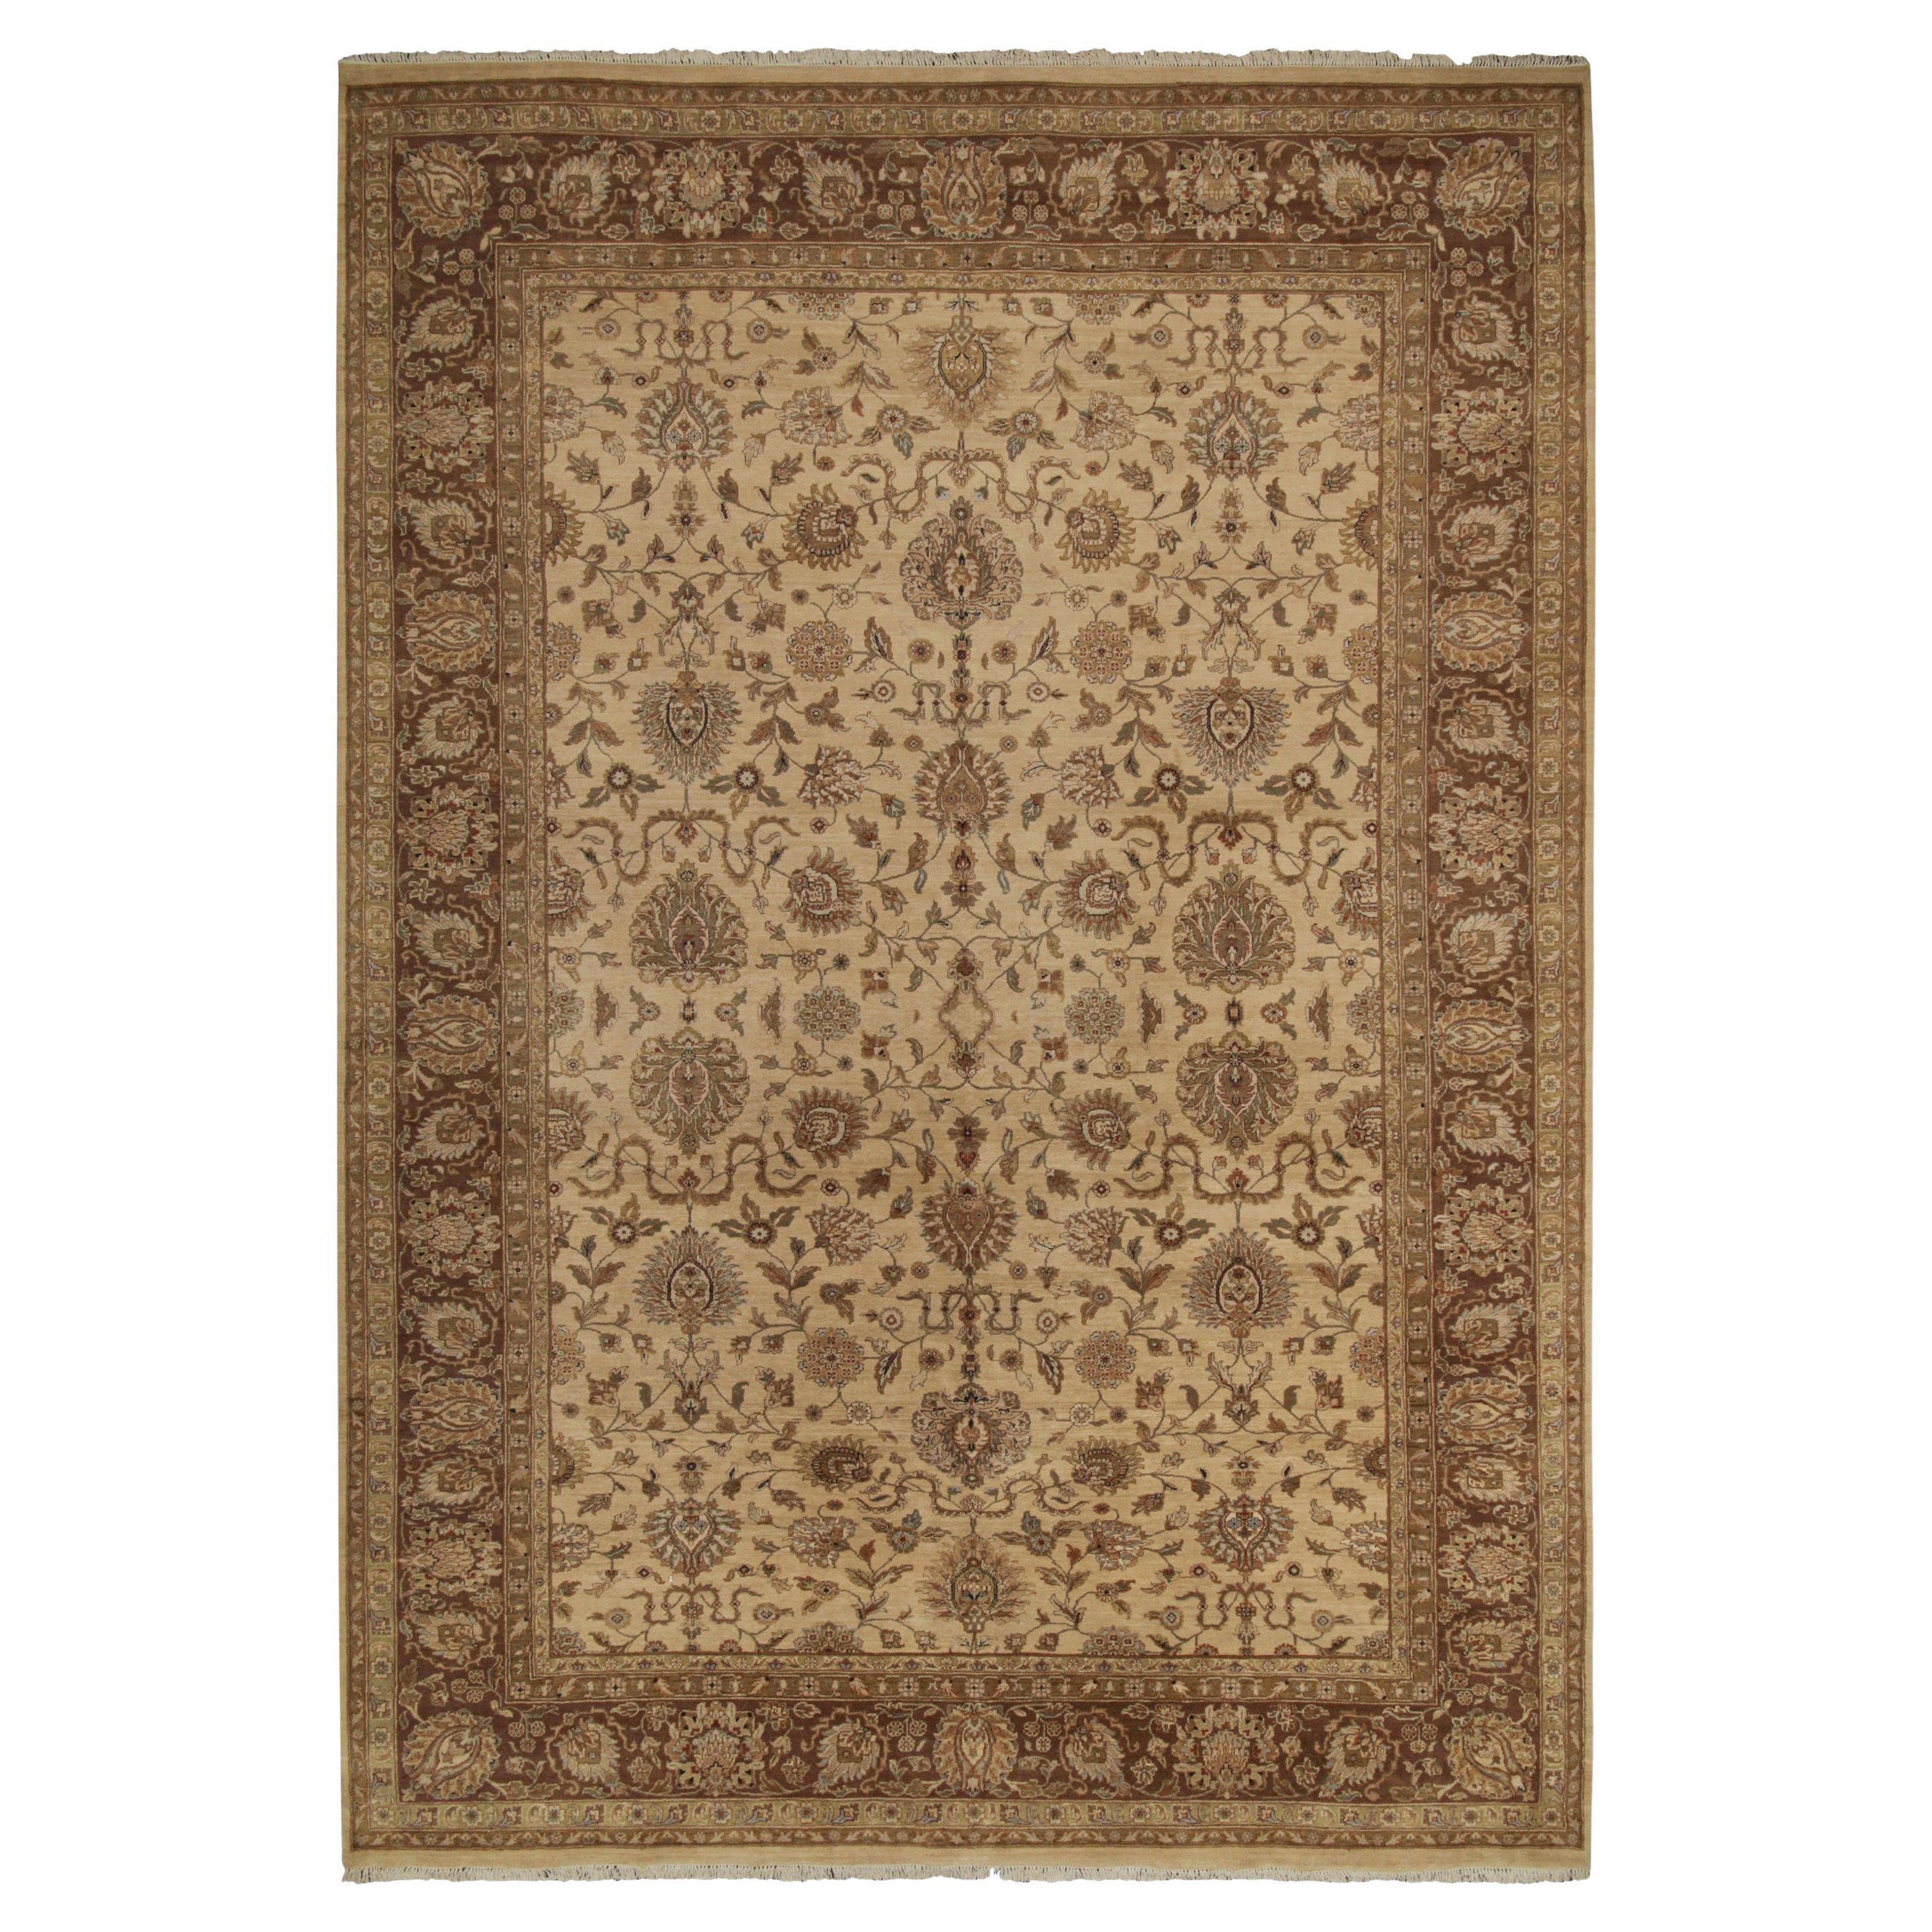 Rug & Kilim’s Persian Style rug in Beige-Brown and Gold Floral Pattern For Sale